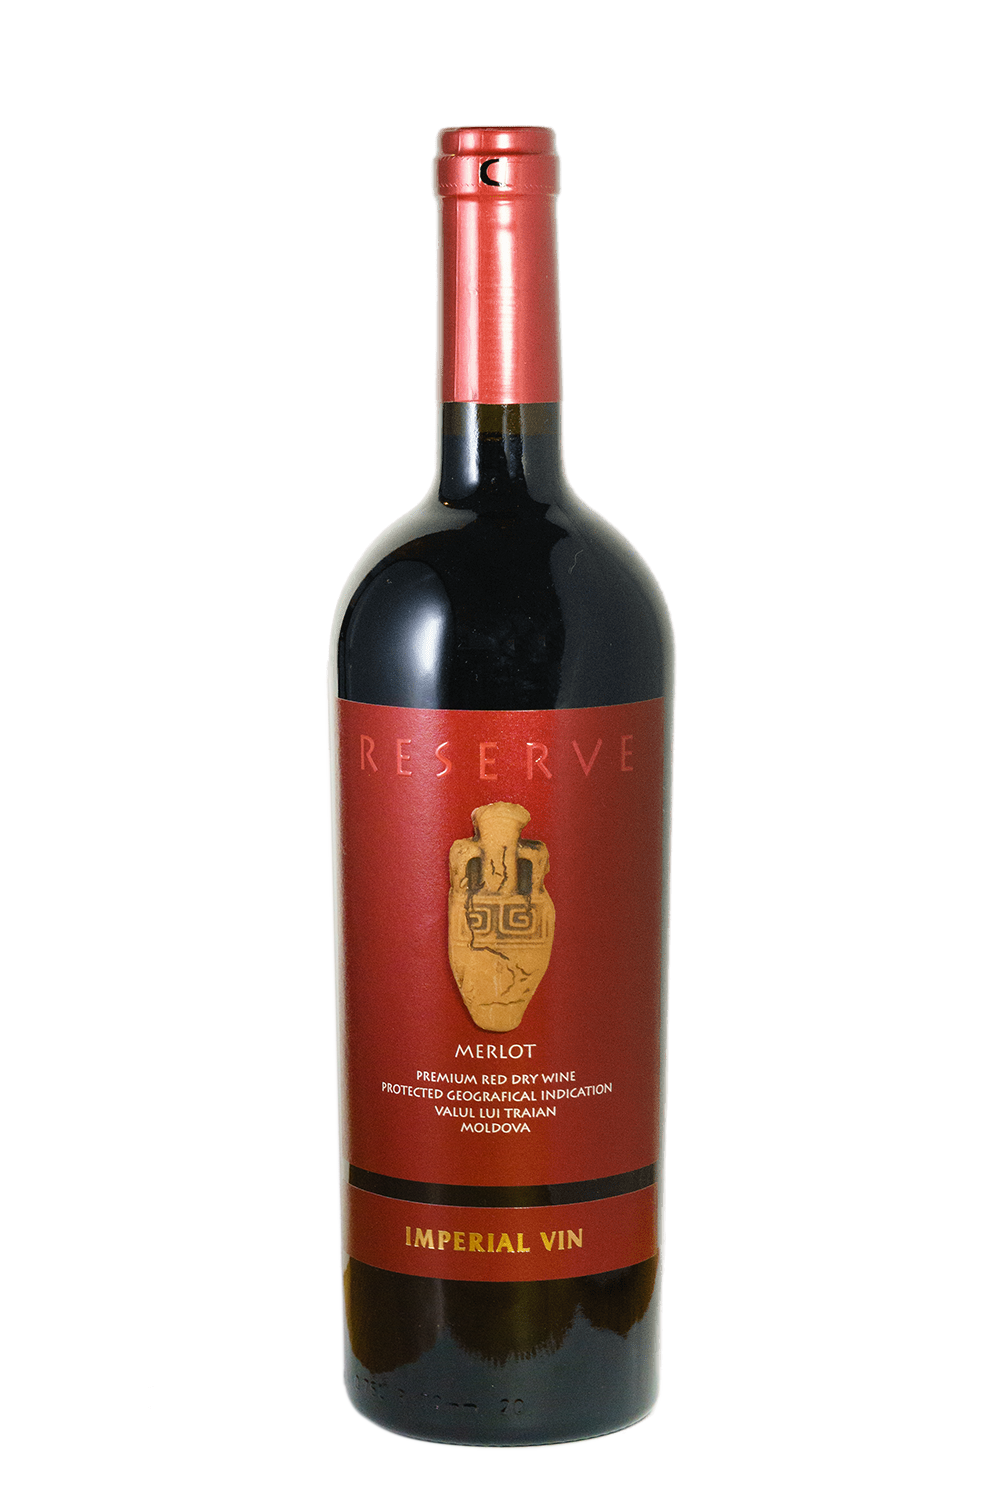 Imperial Vin Reserva Collection Merlot IGP 2017